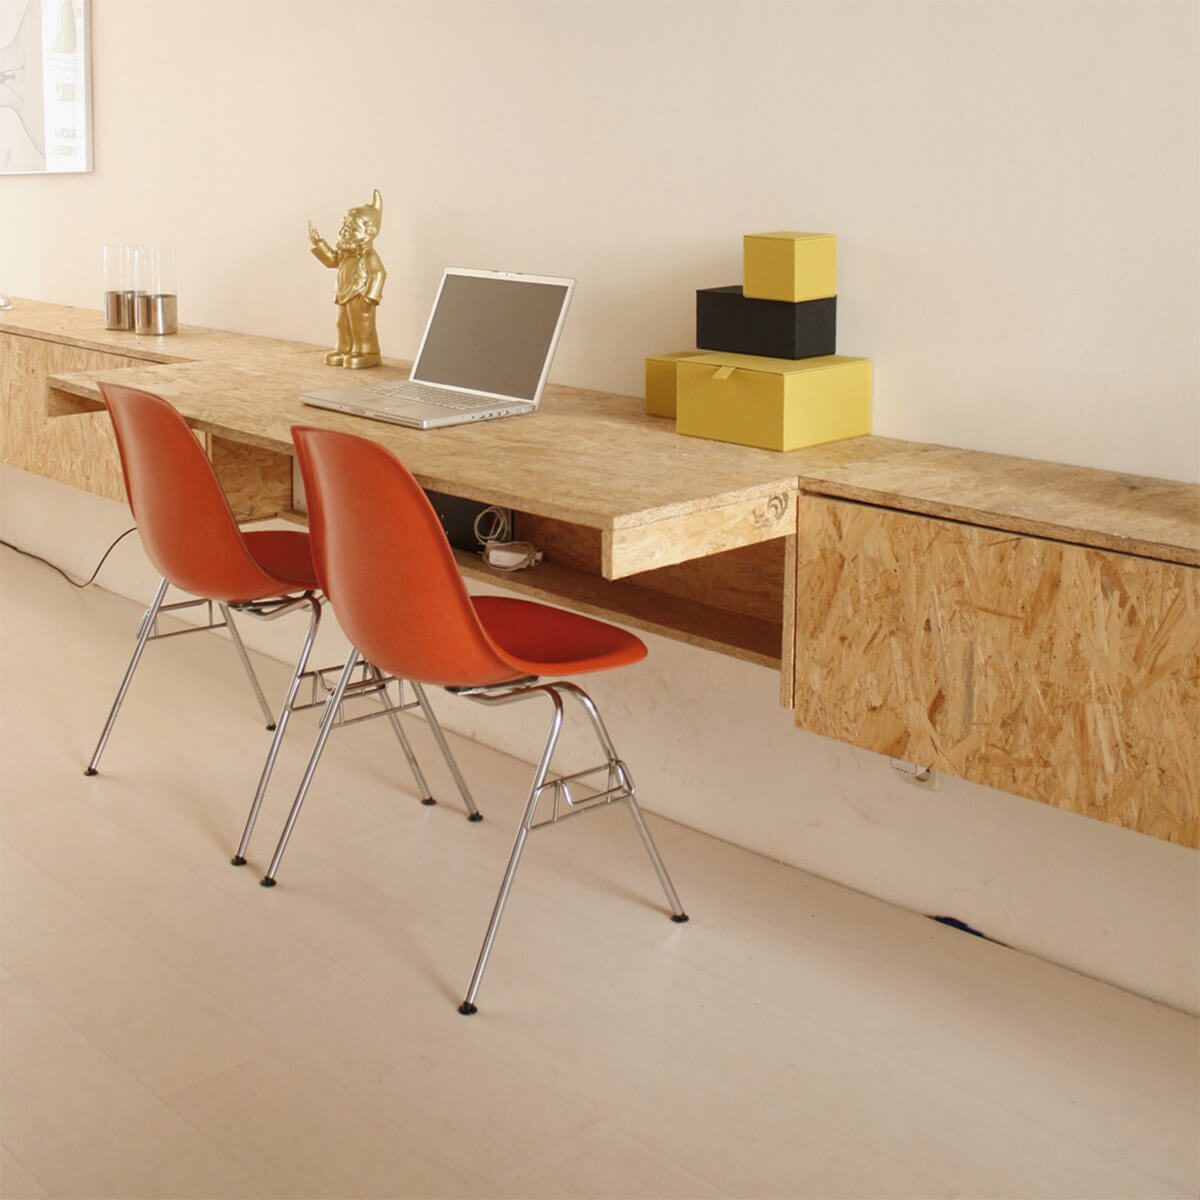 16 Ways to Get Creative with Plywood Furniture — The ...